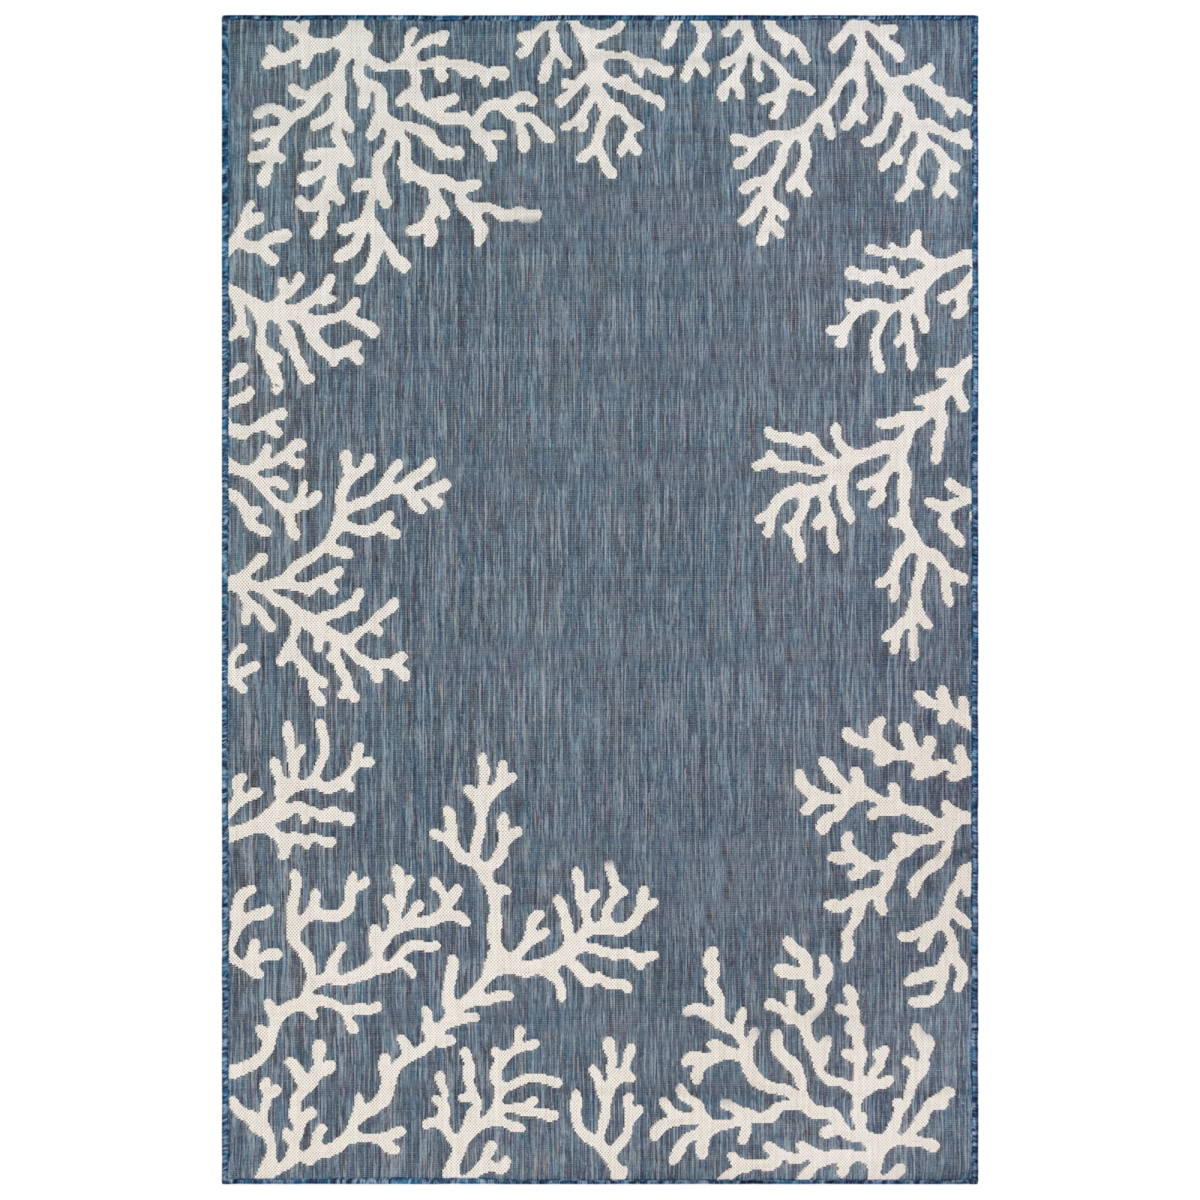 Cre69844833 Liora Manne Carmel Coral Border Indoor & Outdoor Rug, Navy - 6 Ft. 6 In. X 9 Ft. 4 In.